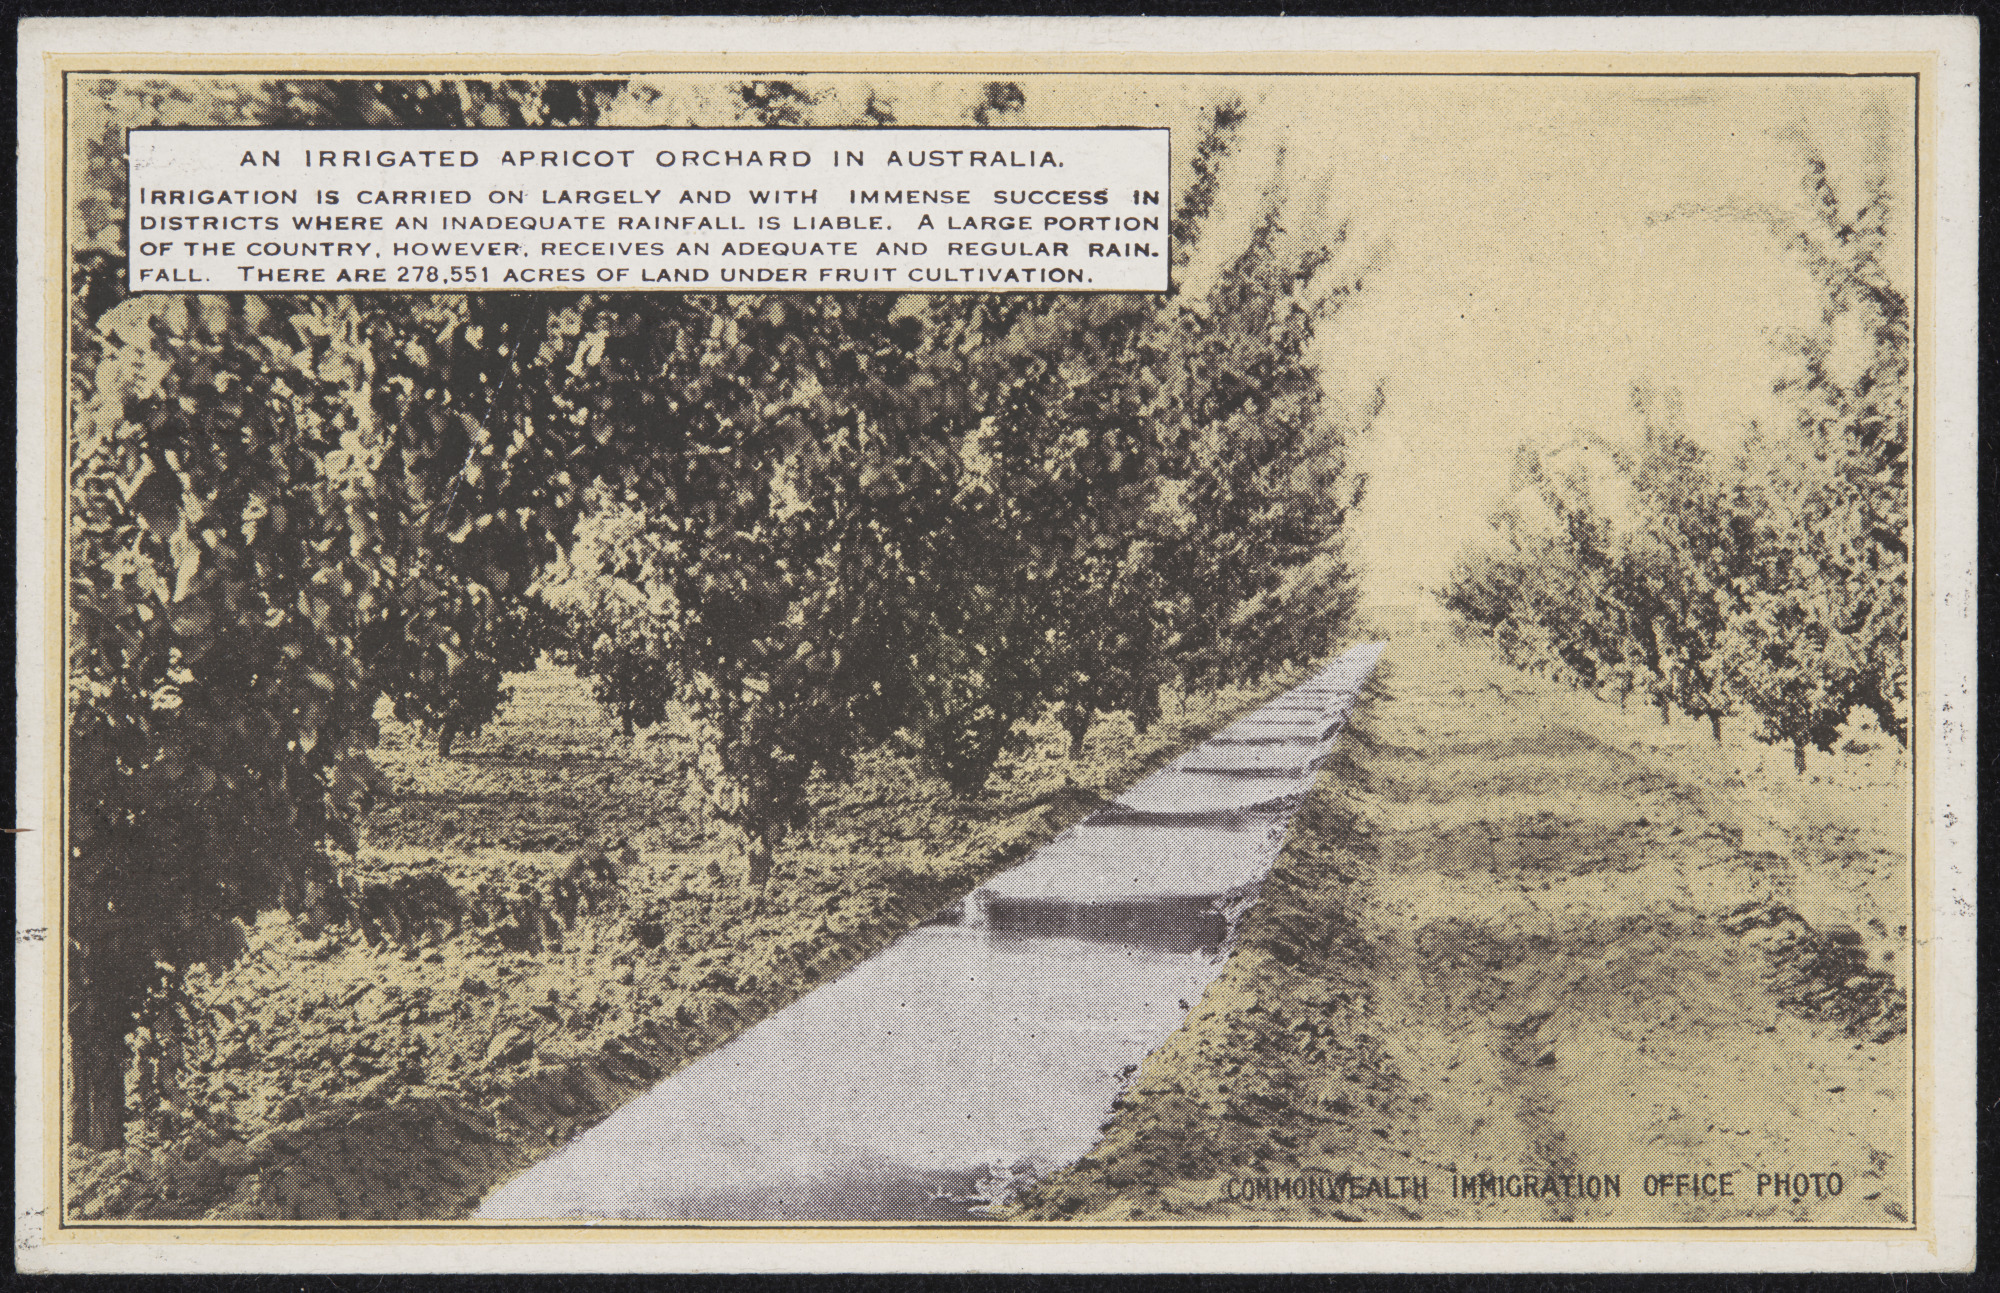 <p>Postcard showing an irrigated apricot orchard in Australia</p>
